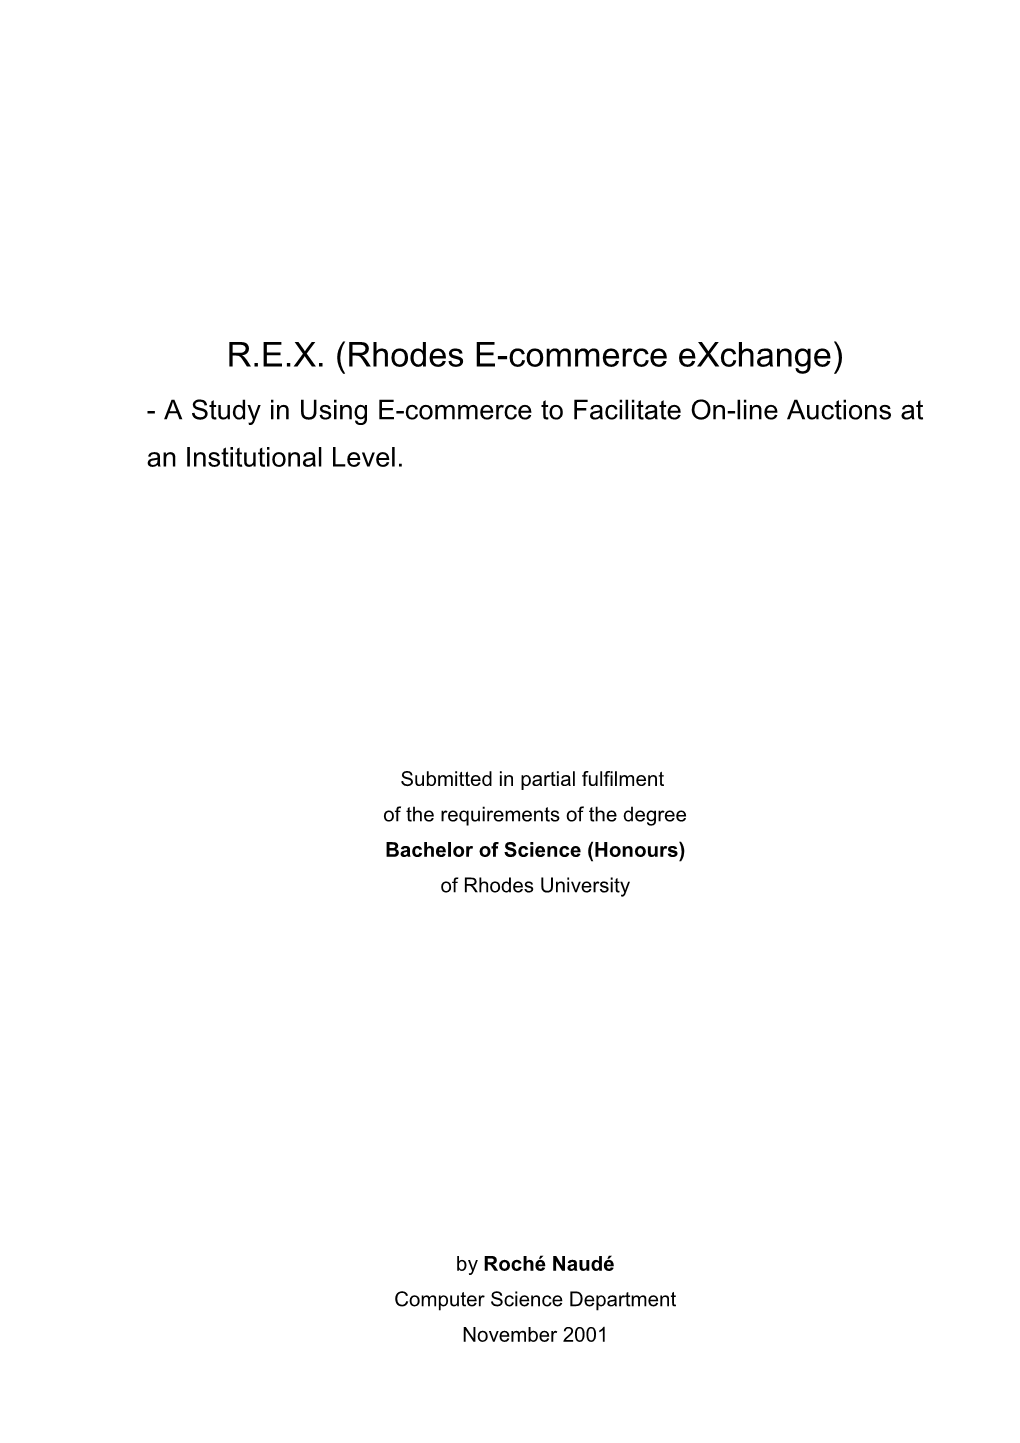 a Study in Using E-Commerce to Facilitate On-Line Auctions at an Institutional Level